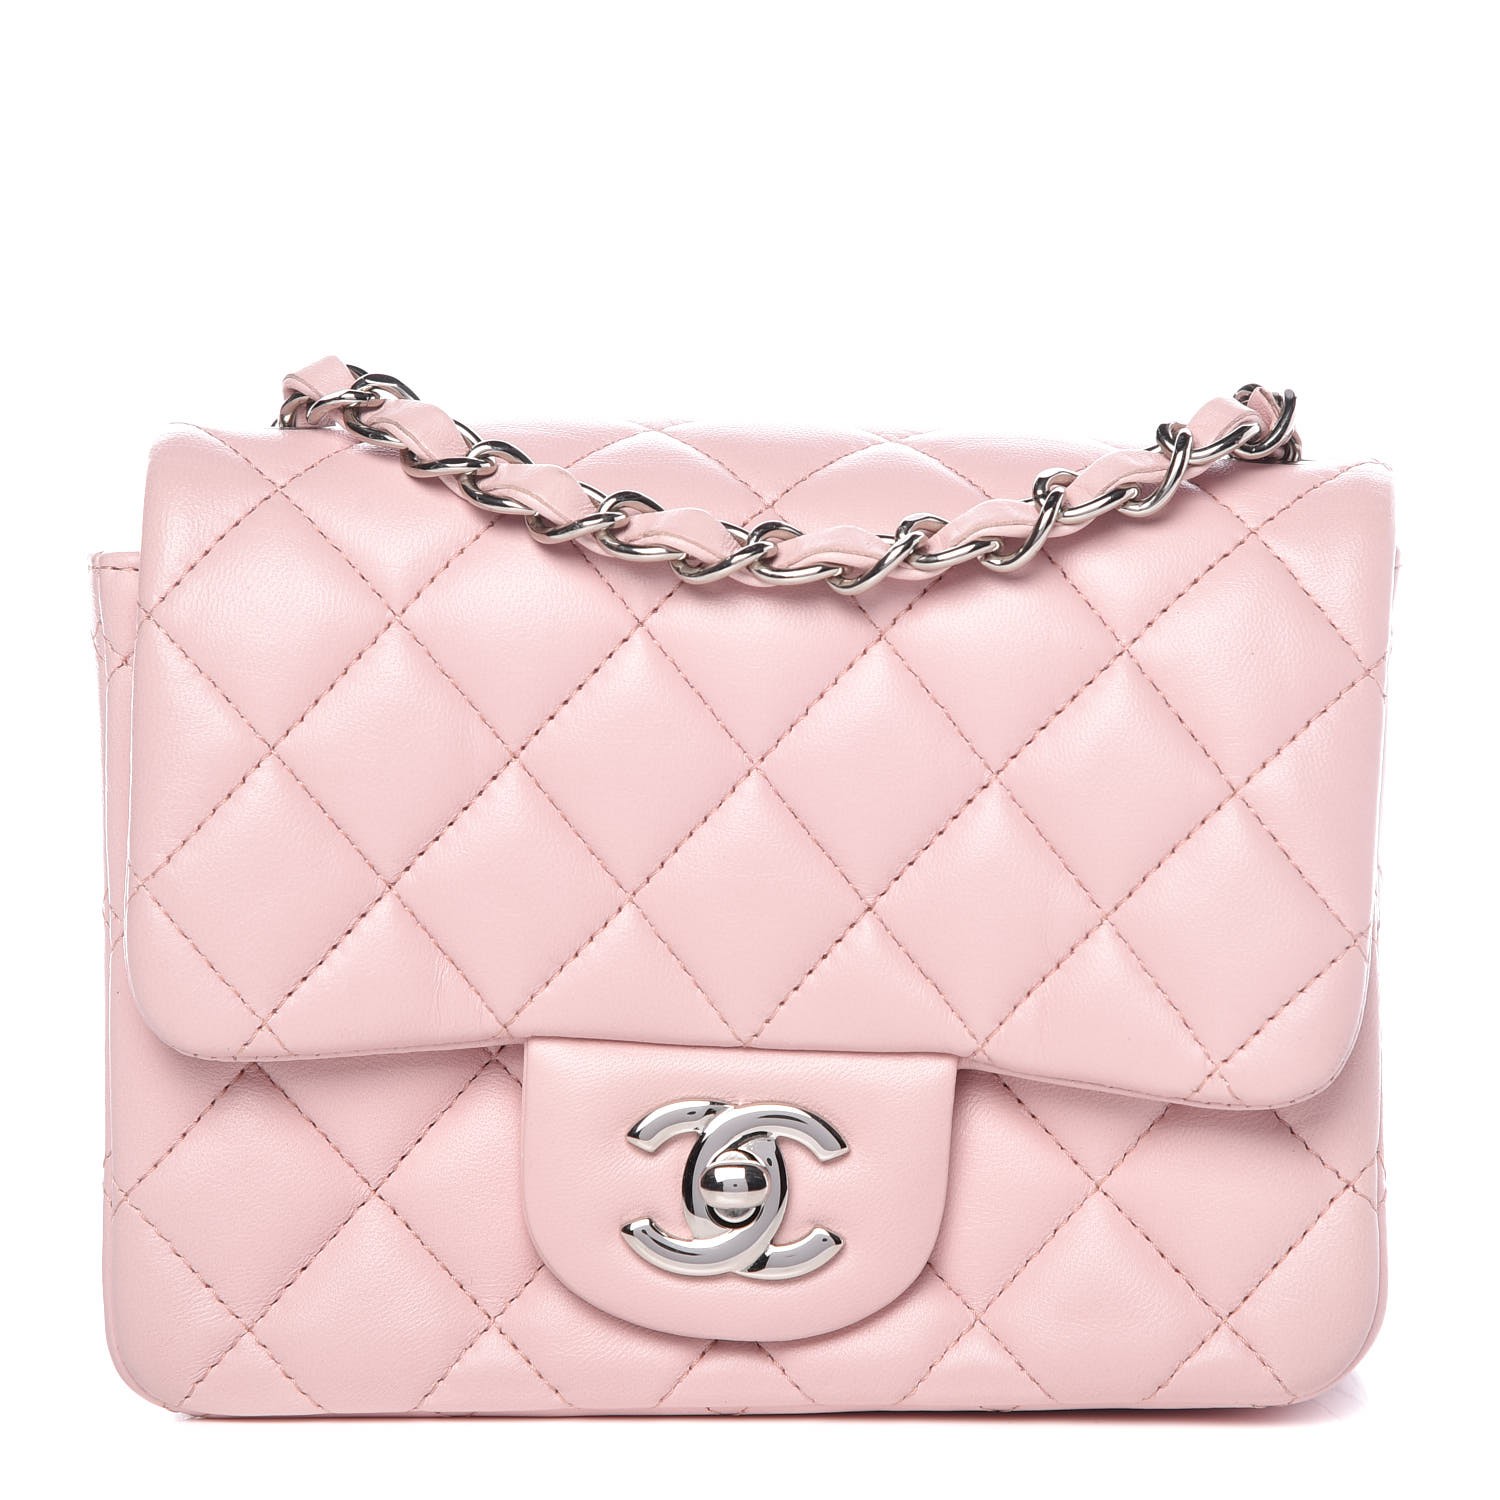 CHANEL Lambskin Quilted Mini Square Flap Light Pink 343633